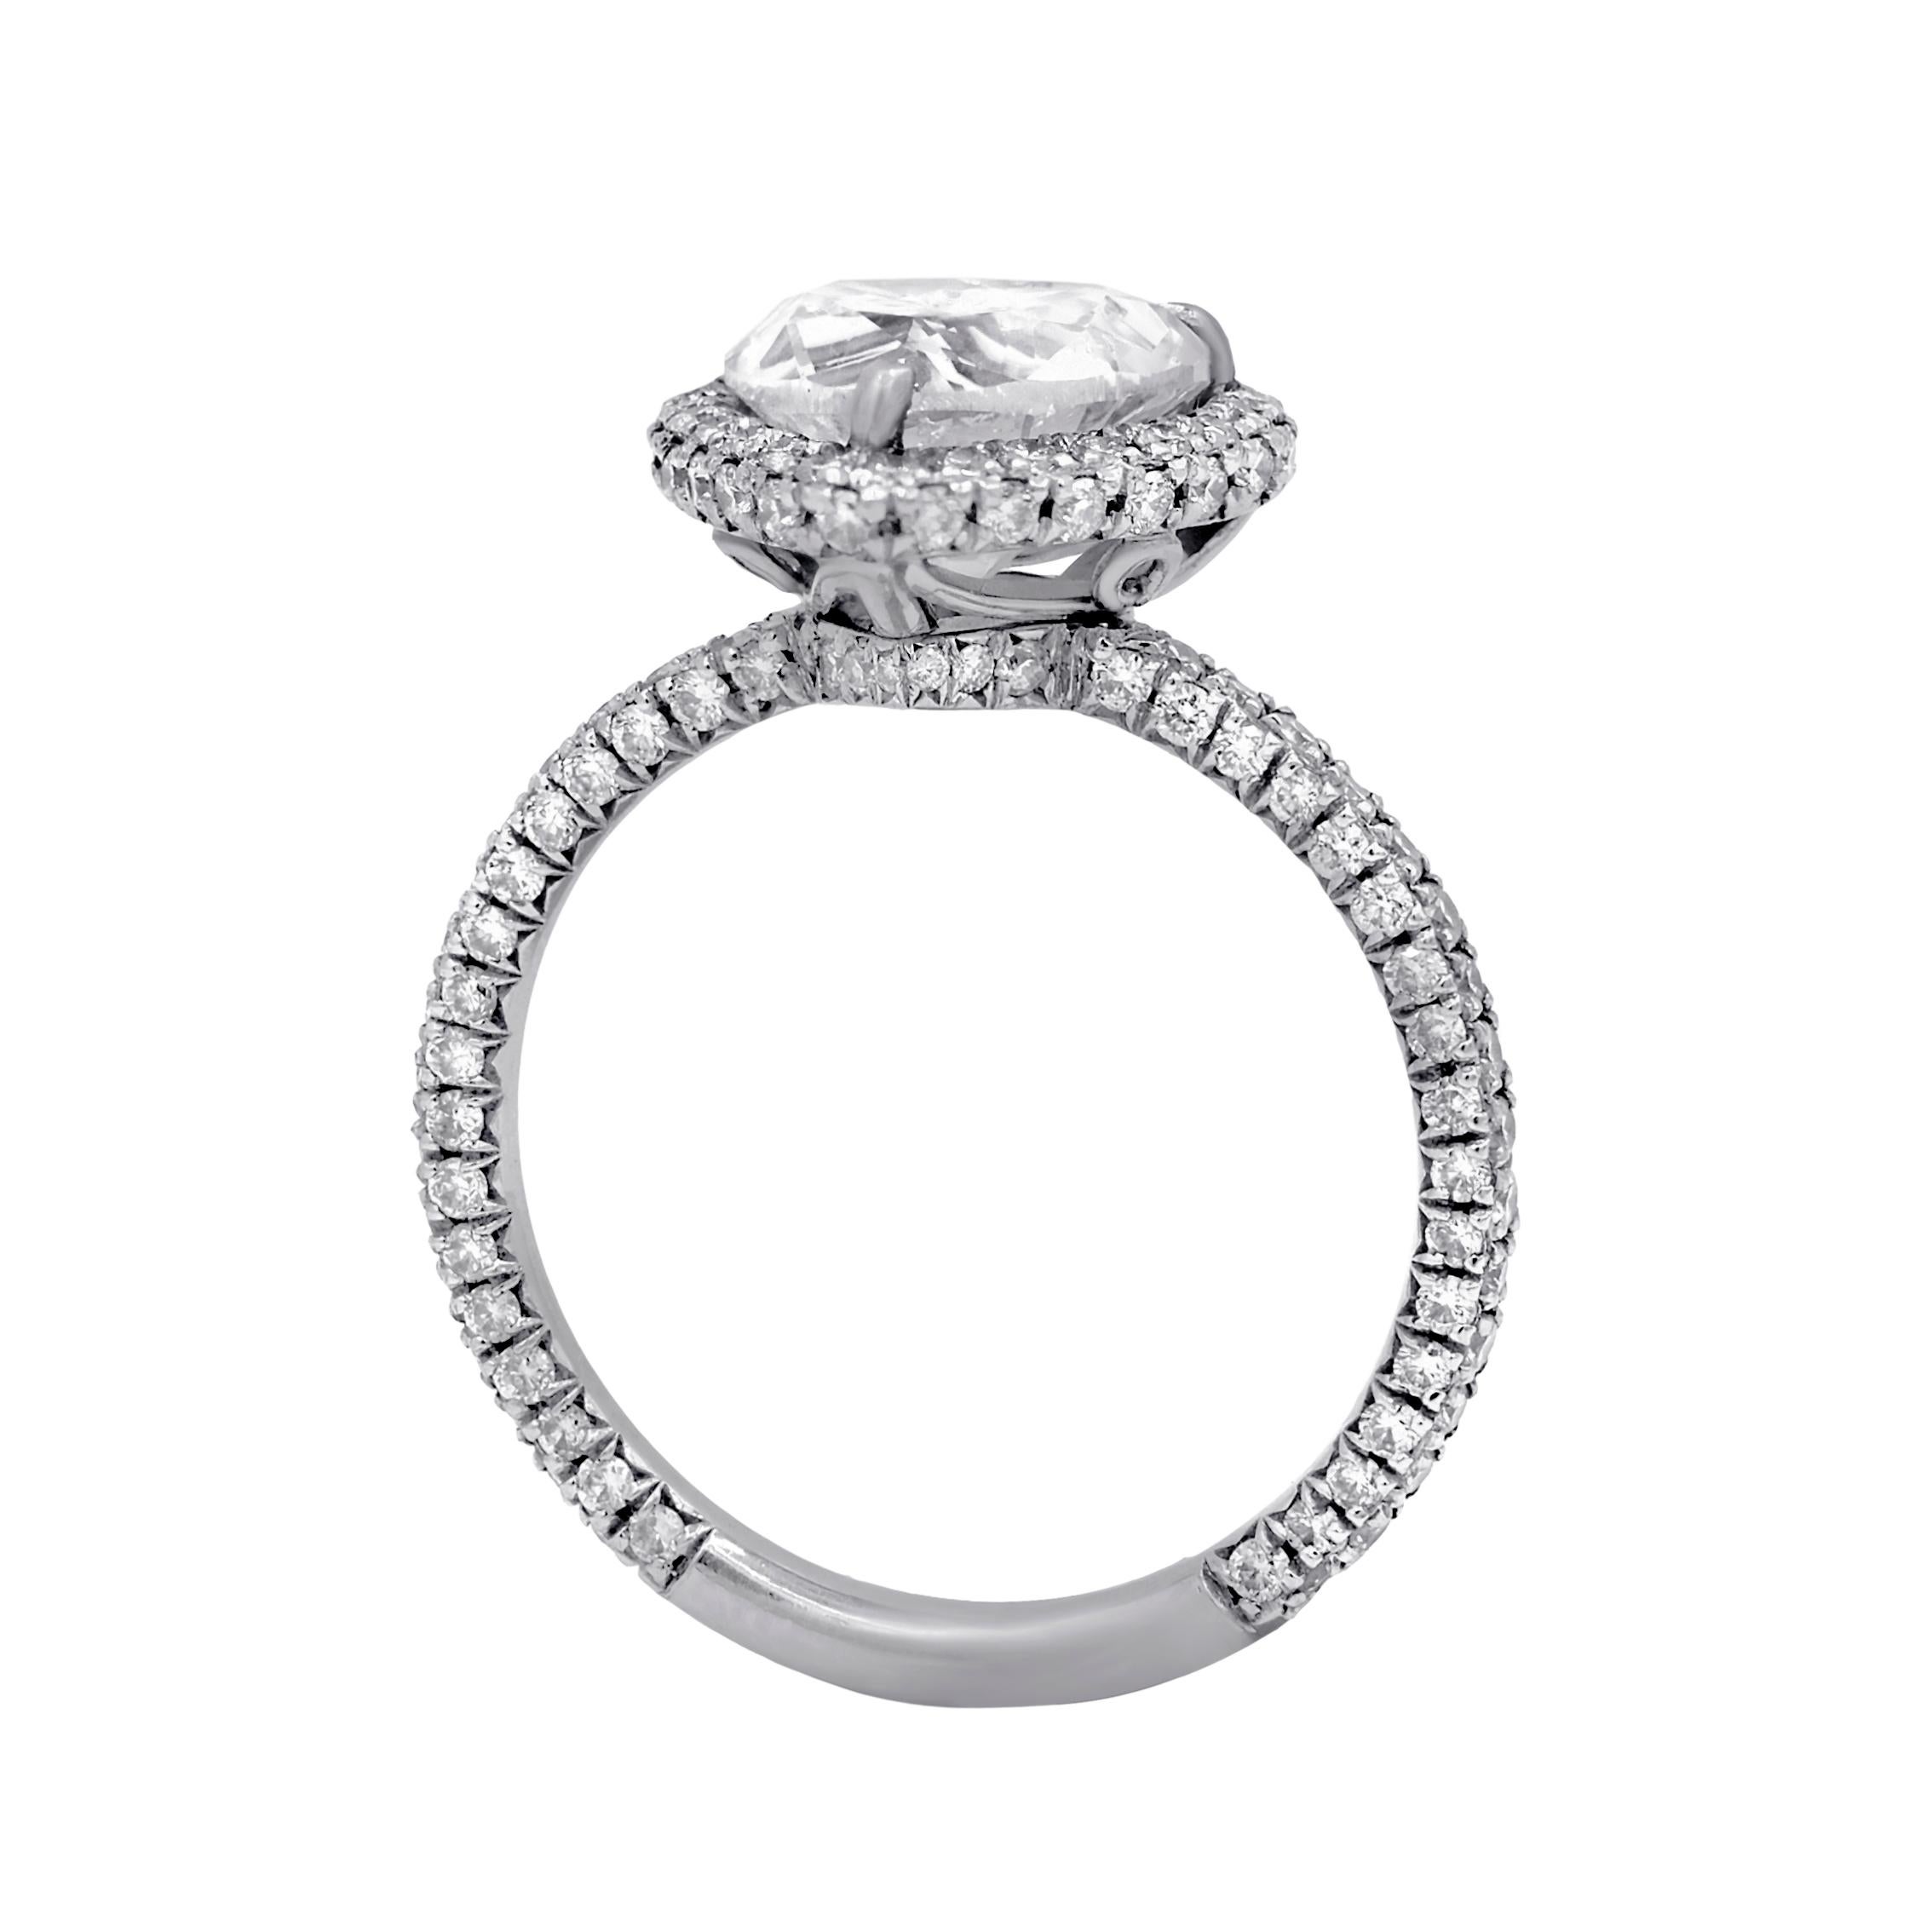 Platinum engagement ring featuring a center (G-SI2) 2.01 ct heart shaped diamond surrounded by 1.20 cts tw of micropave diamonds
Diana M. is a leading supplier of top-quality fine jewelry for over 35 years.
Diana M is one-stop shop for all your